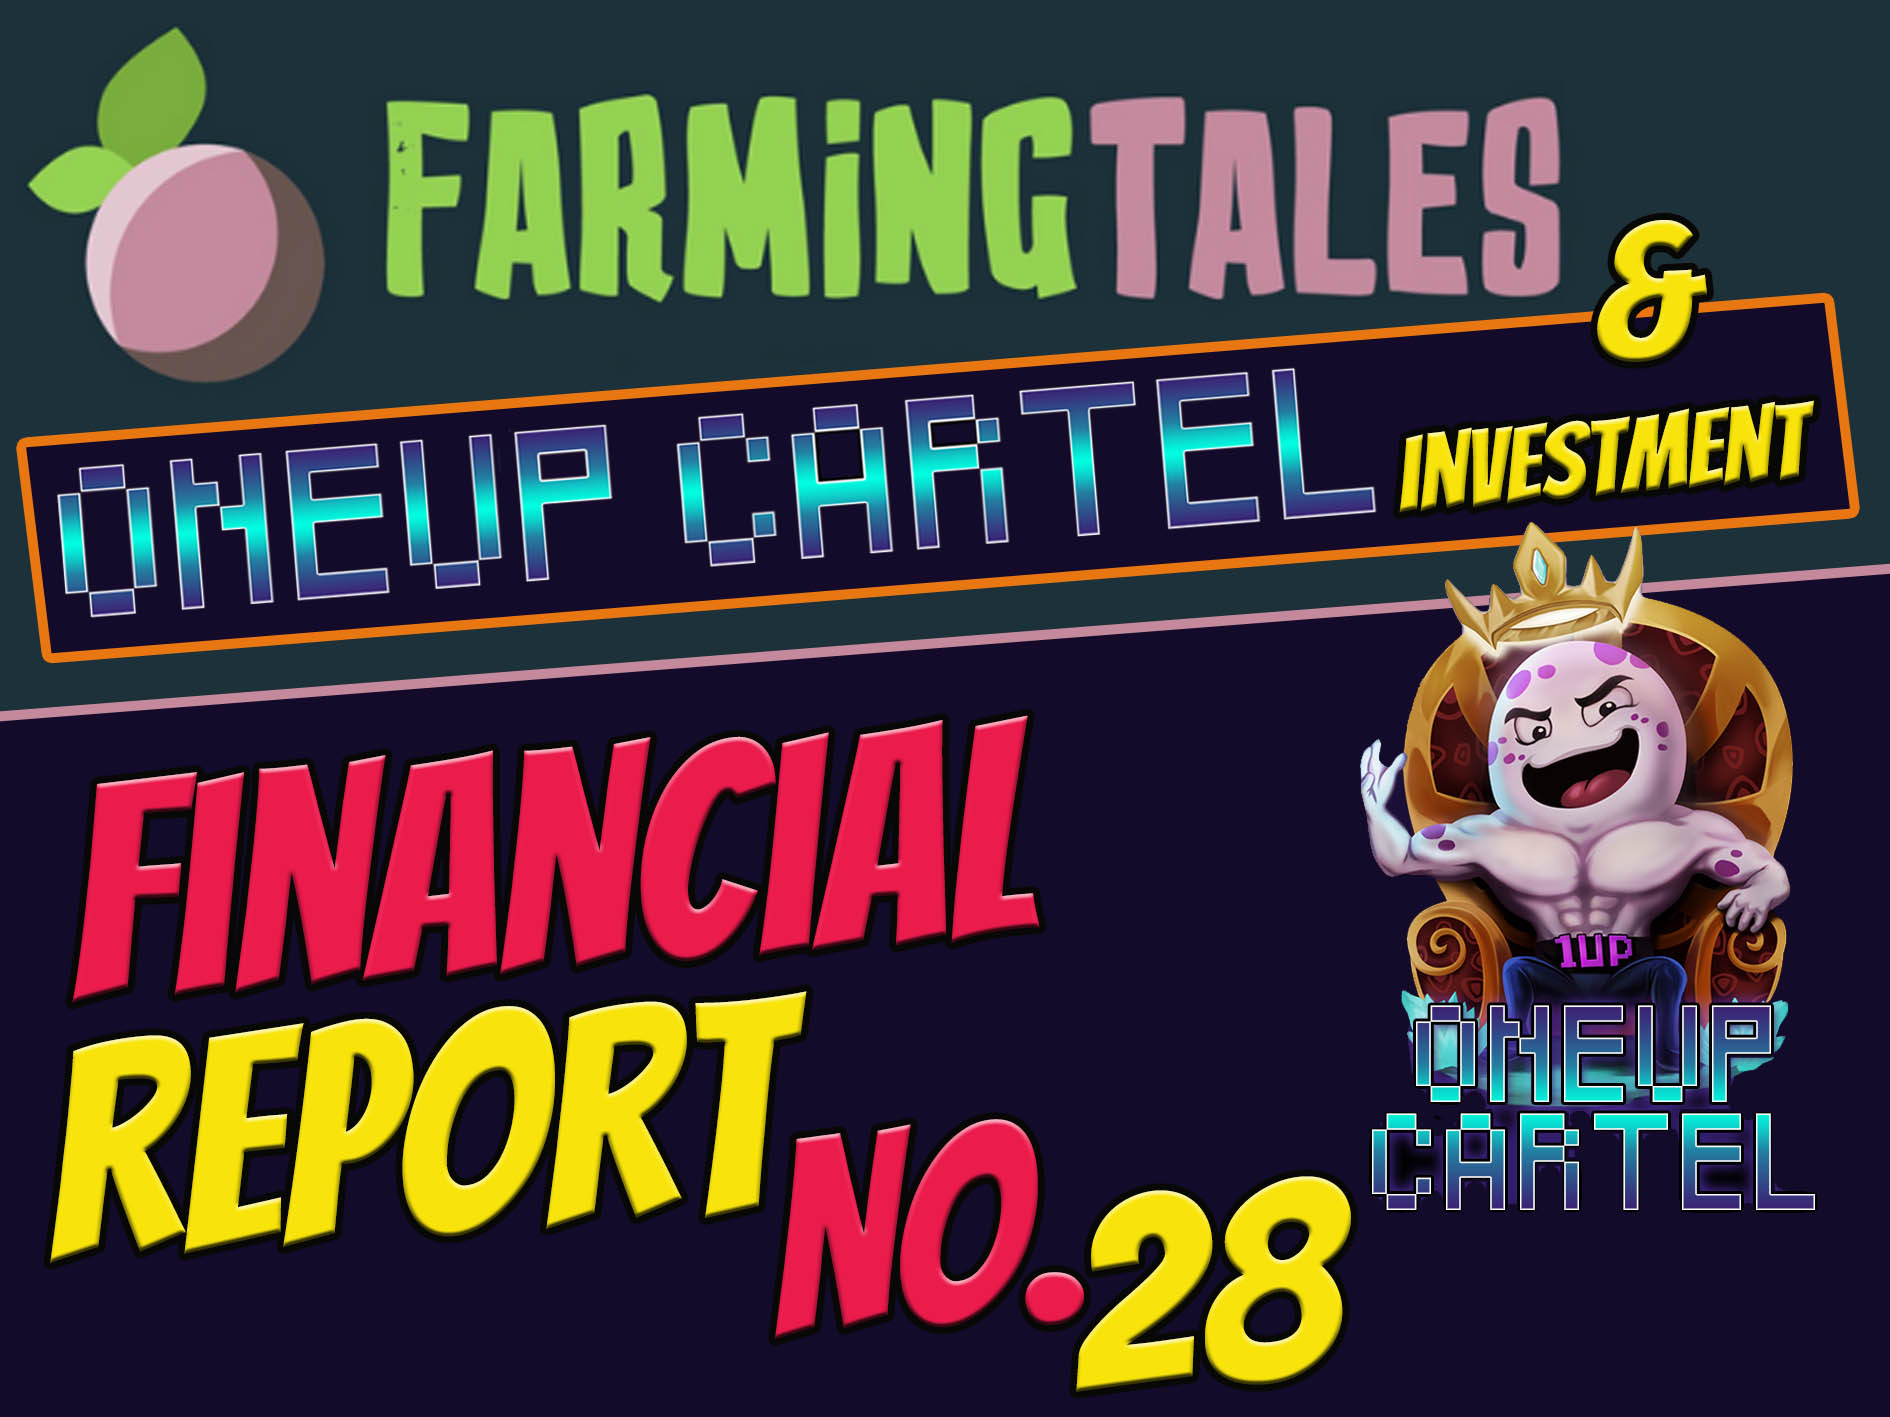 @libertycrypto27/farming-tales-and-oneup-cartel-investment-financial-report-no28-engita